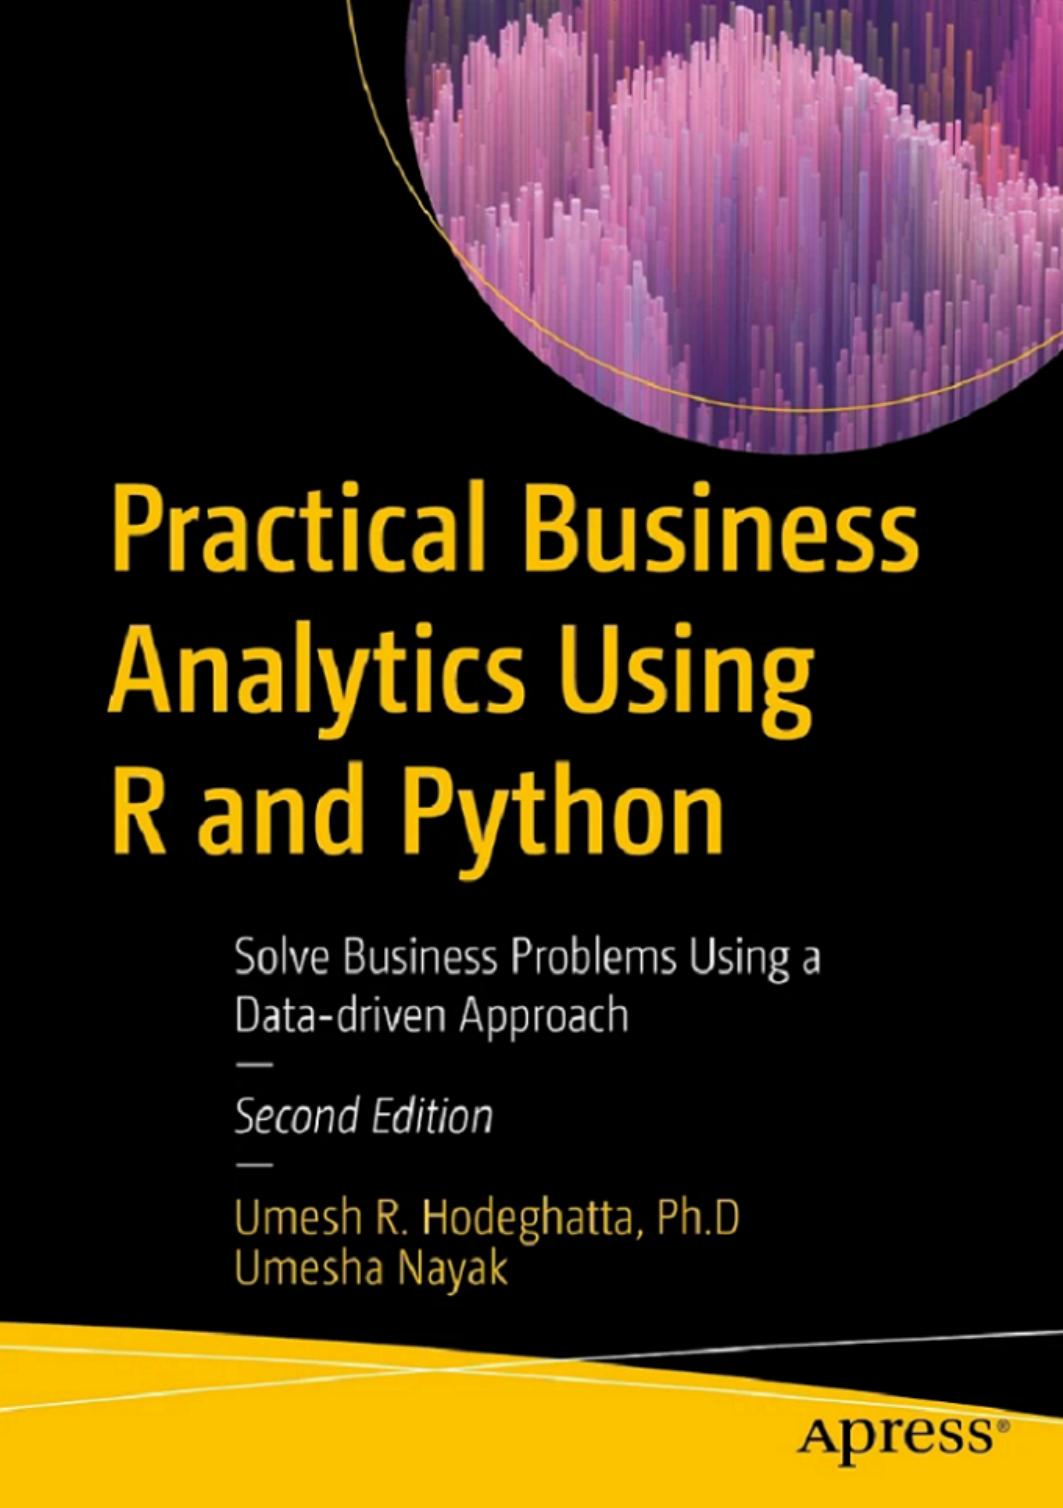 Practical Business Analytics Using R and Python: Solve Business Problems Using a Data-driven Approach by Umesh R. Hodeghatta Ph.D Umesha Nayak